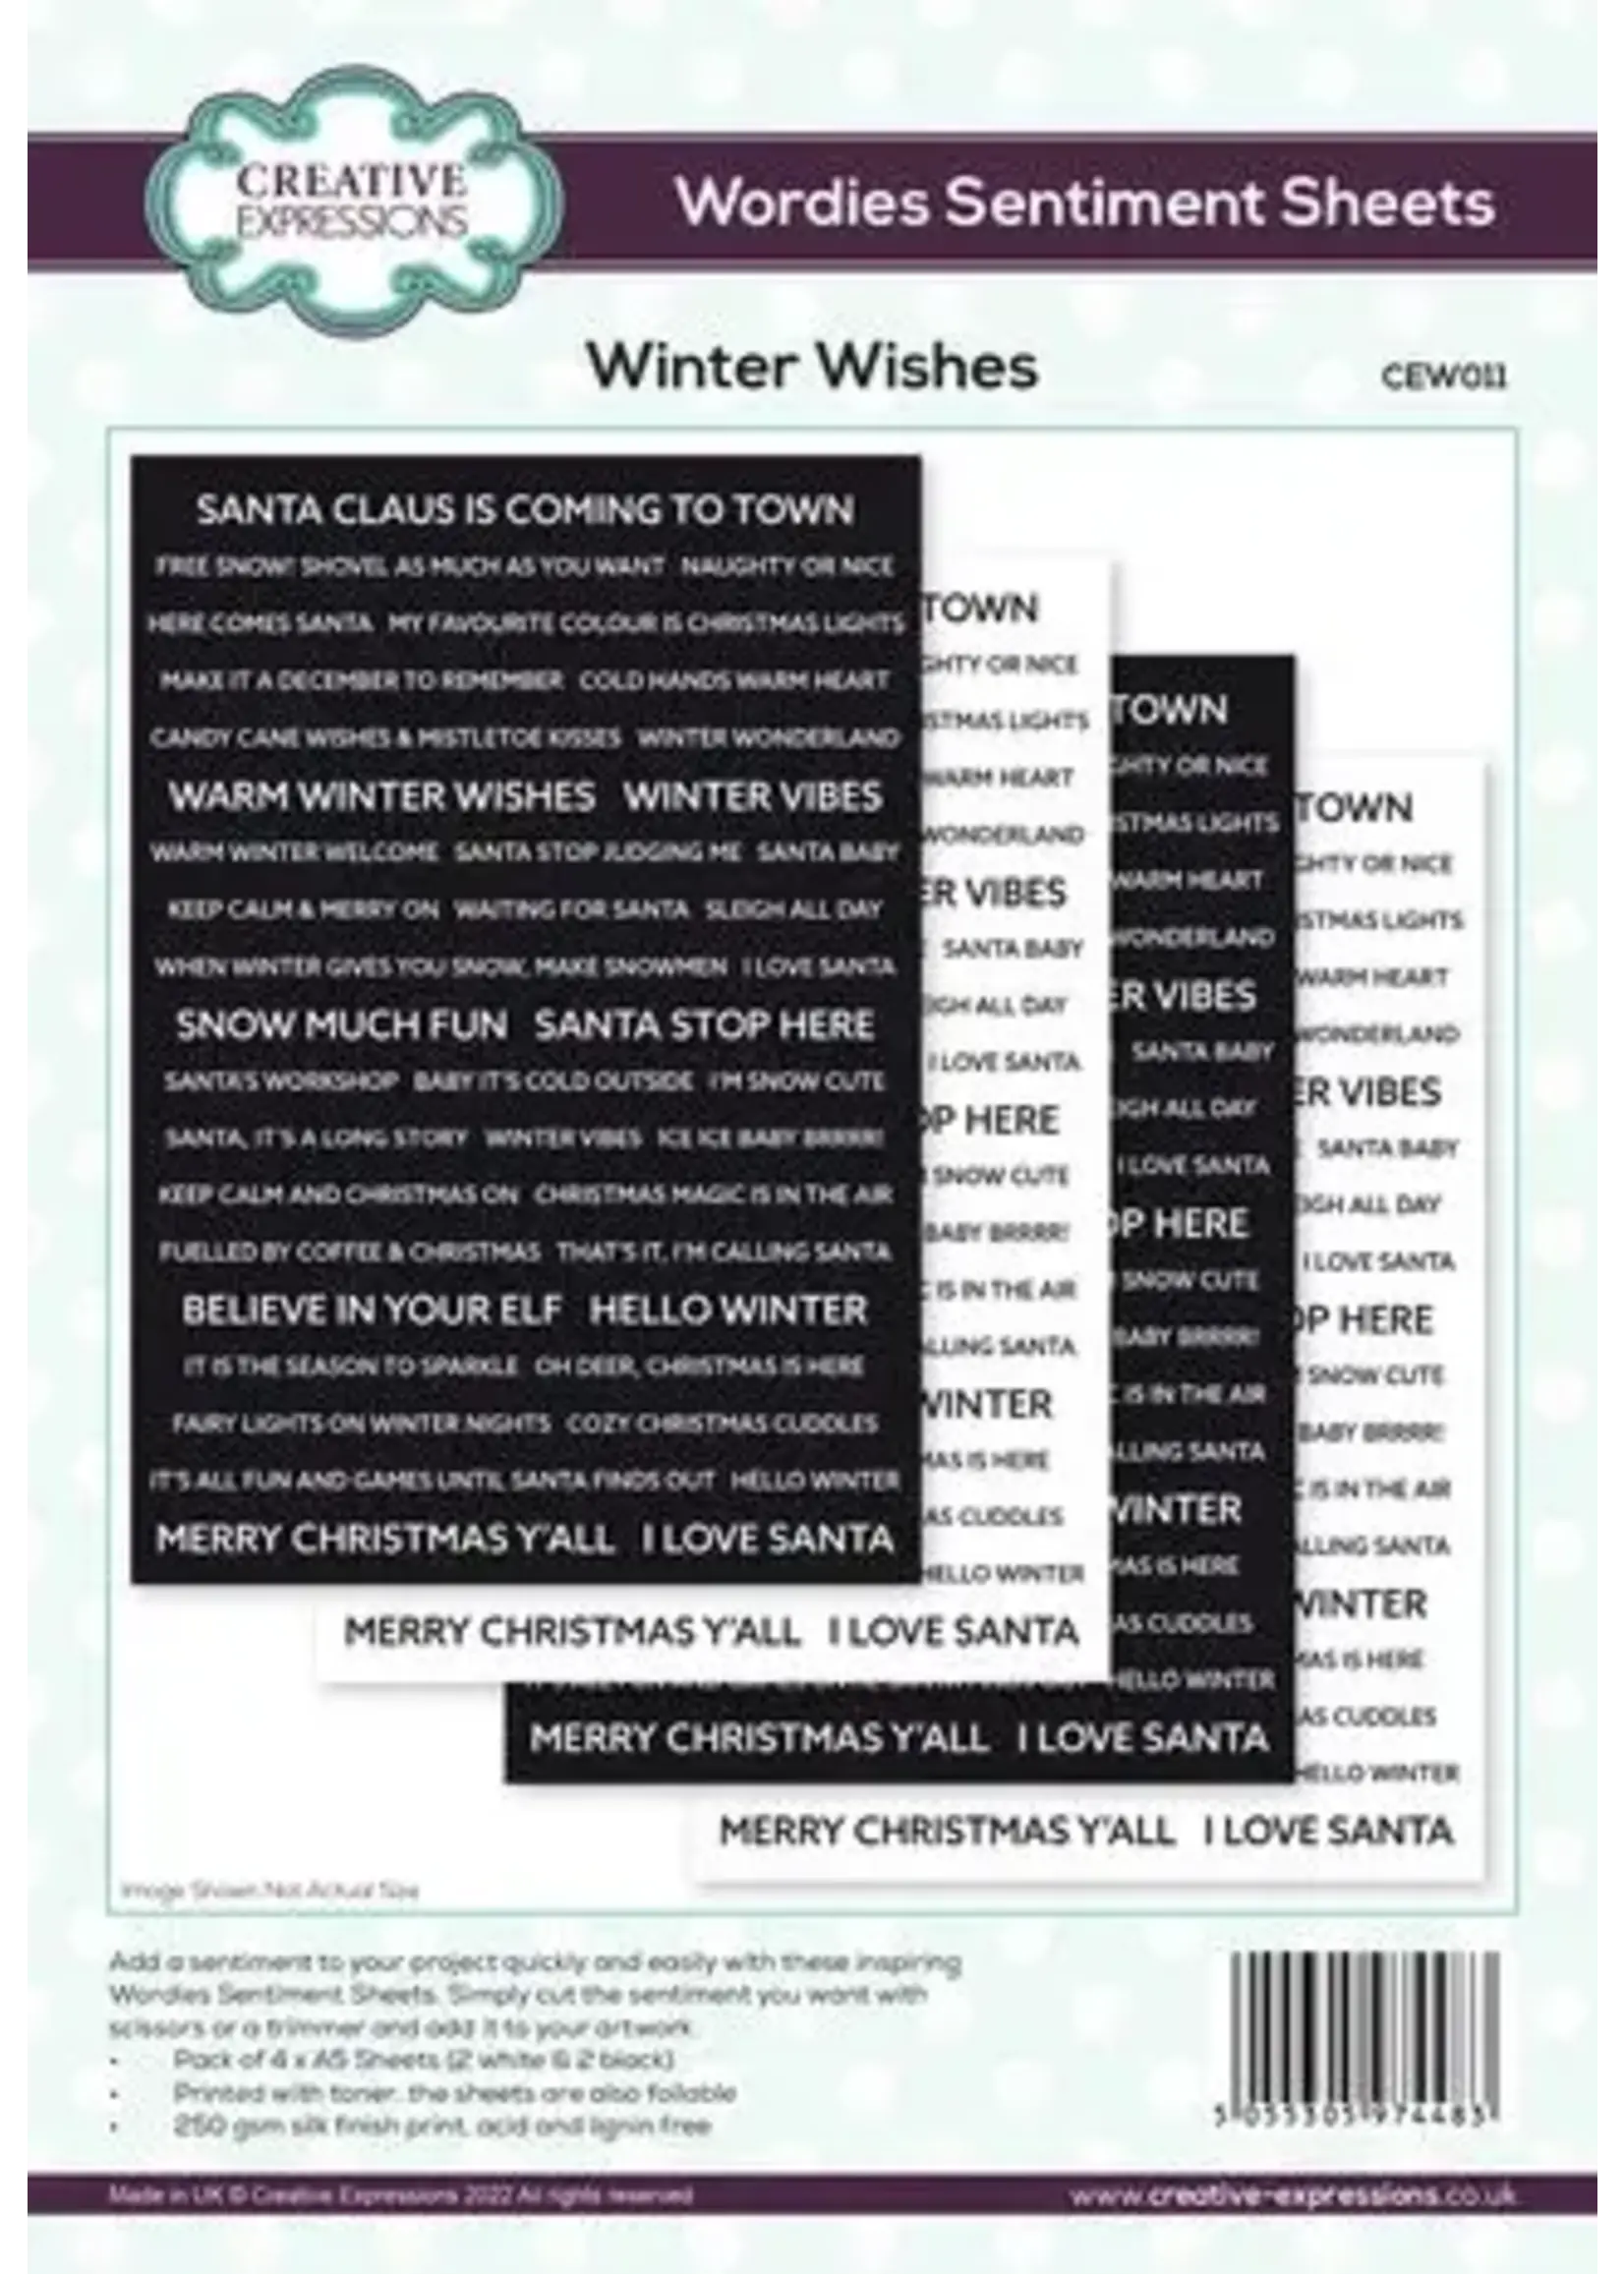 creative expressions Wordies Sentiment Sheets 6x8 Inch Winter Wishes (4pcs) (CEW011)